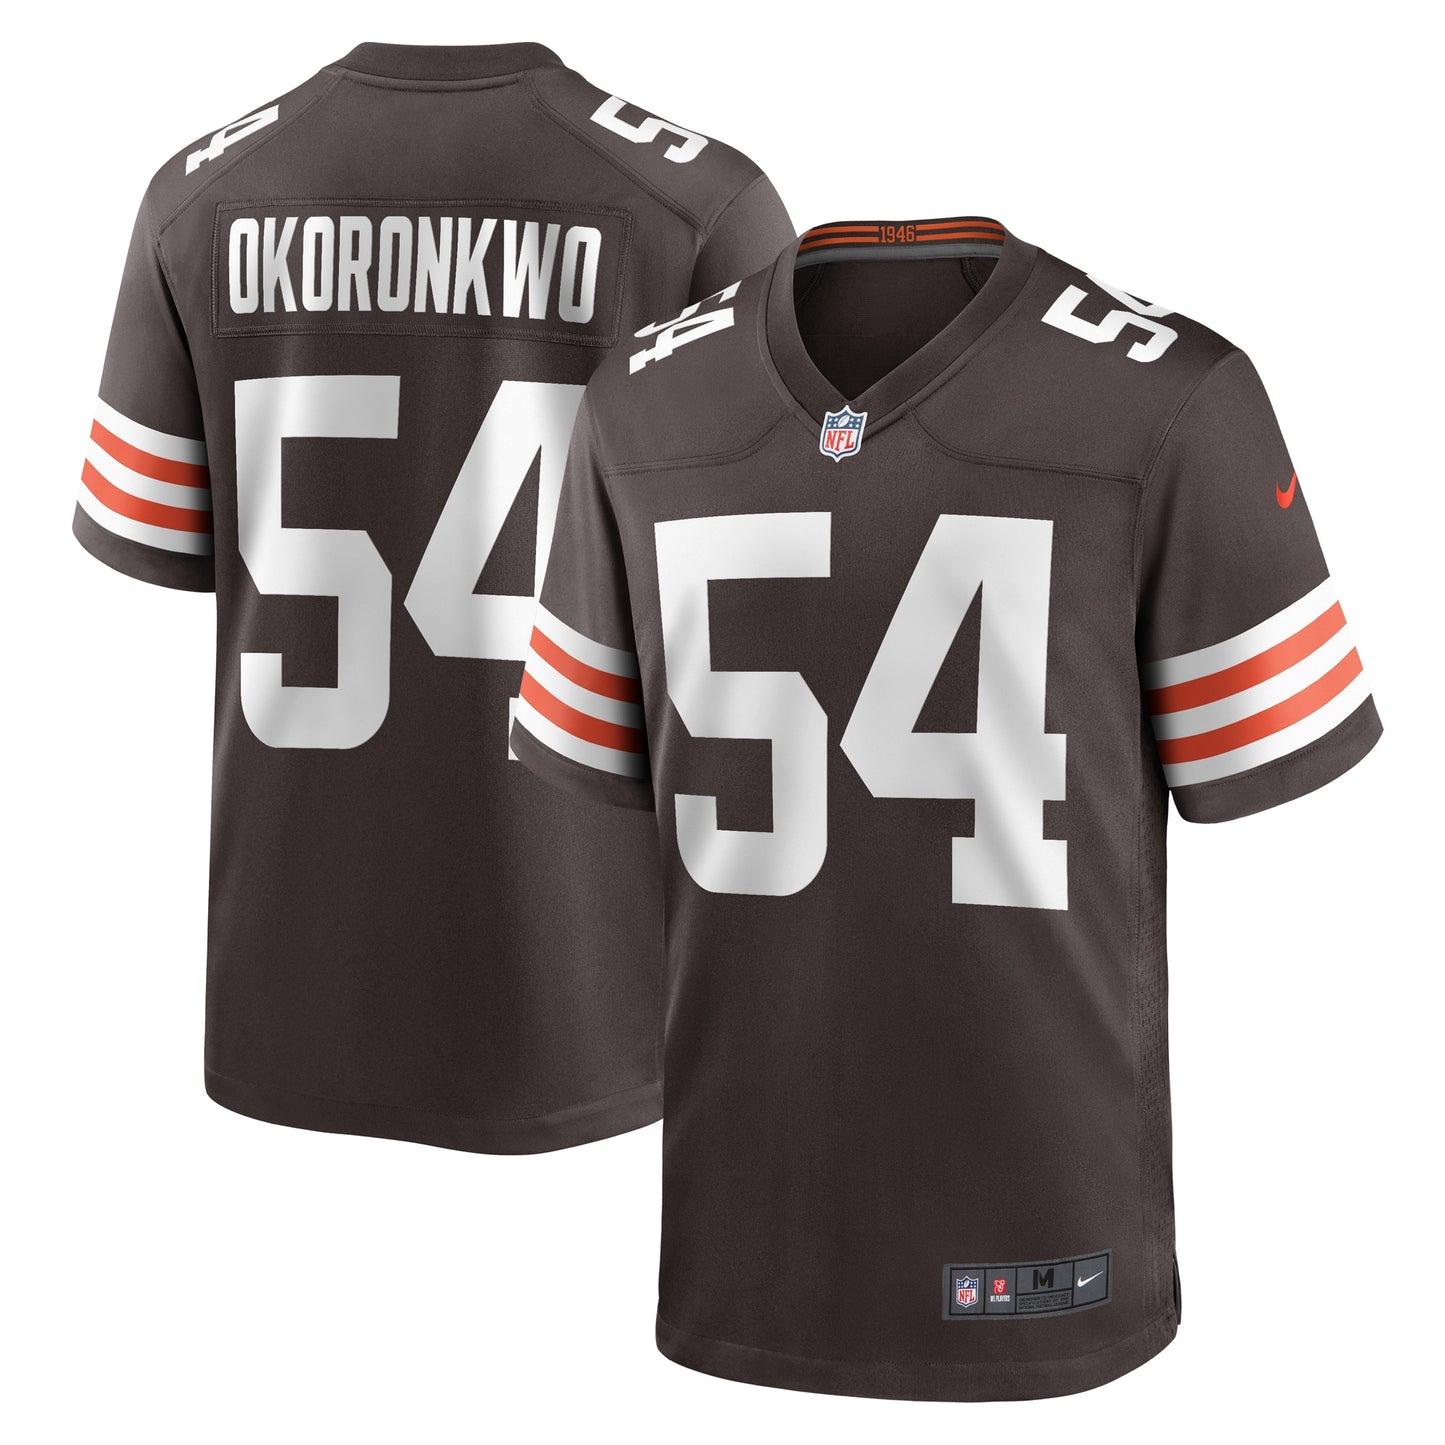 Ogbonnia Okoronkwo Cleveland Browns Nike Game Player Jersey - Brown